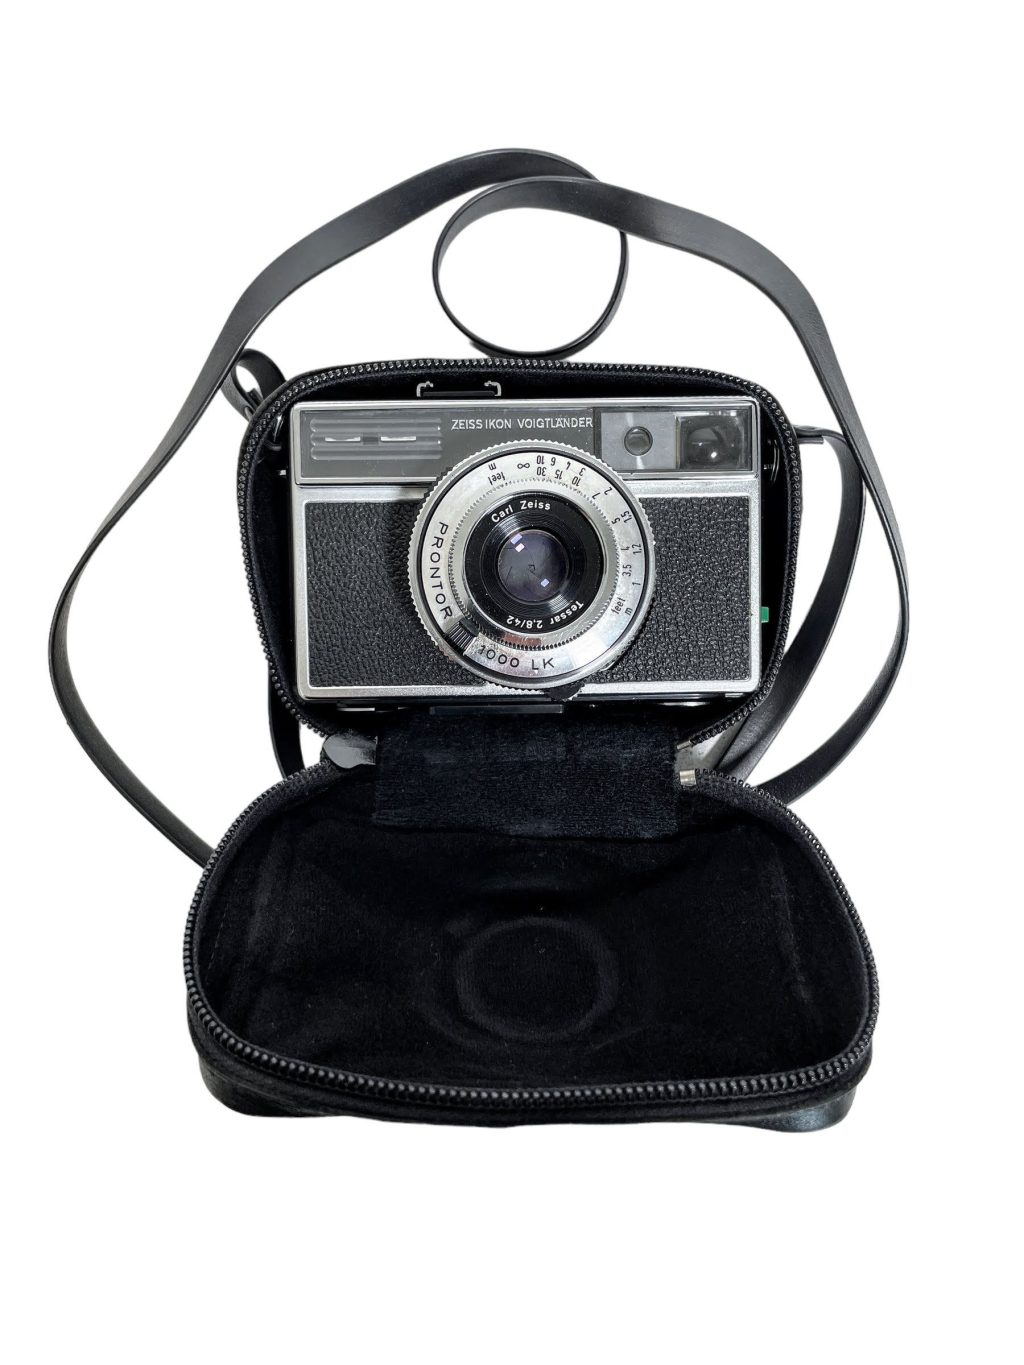 Vintage West German Prontor 1000 LK Camera Still Film Tessar 2.8/42 Carl Zeiss Lens With Zeiss Ikon Leather Case Untested c1950-60’s